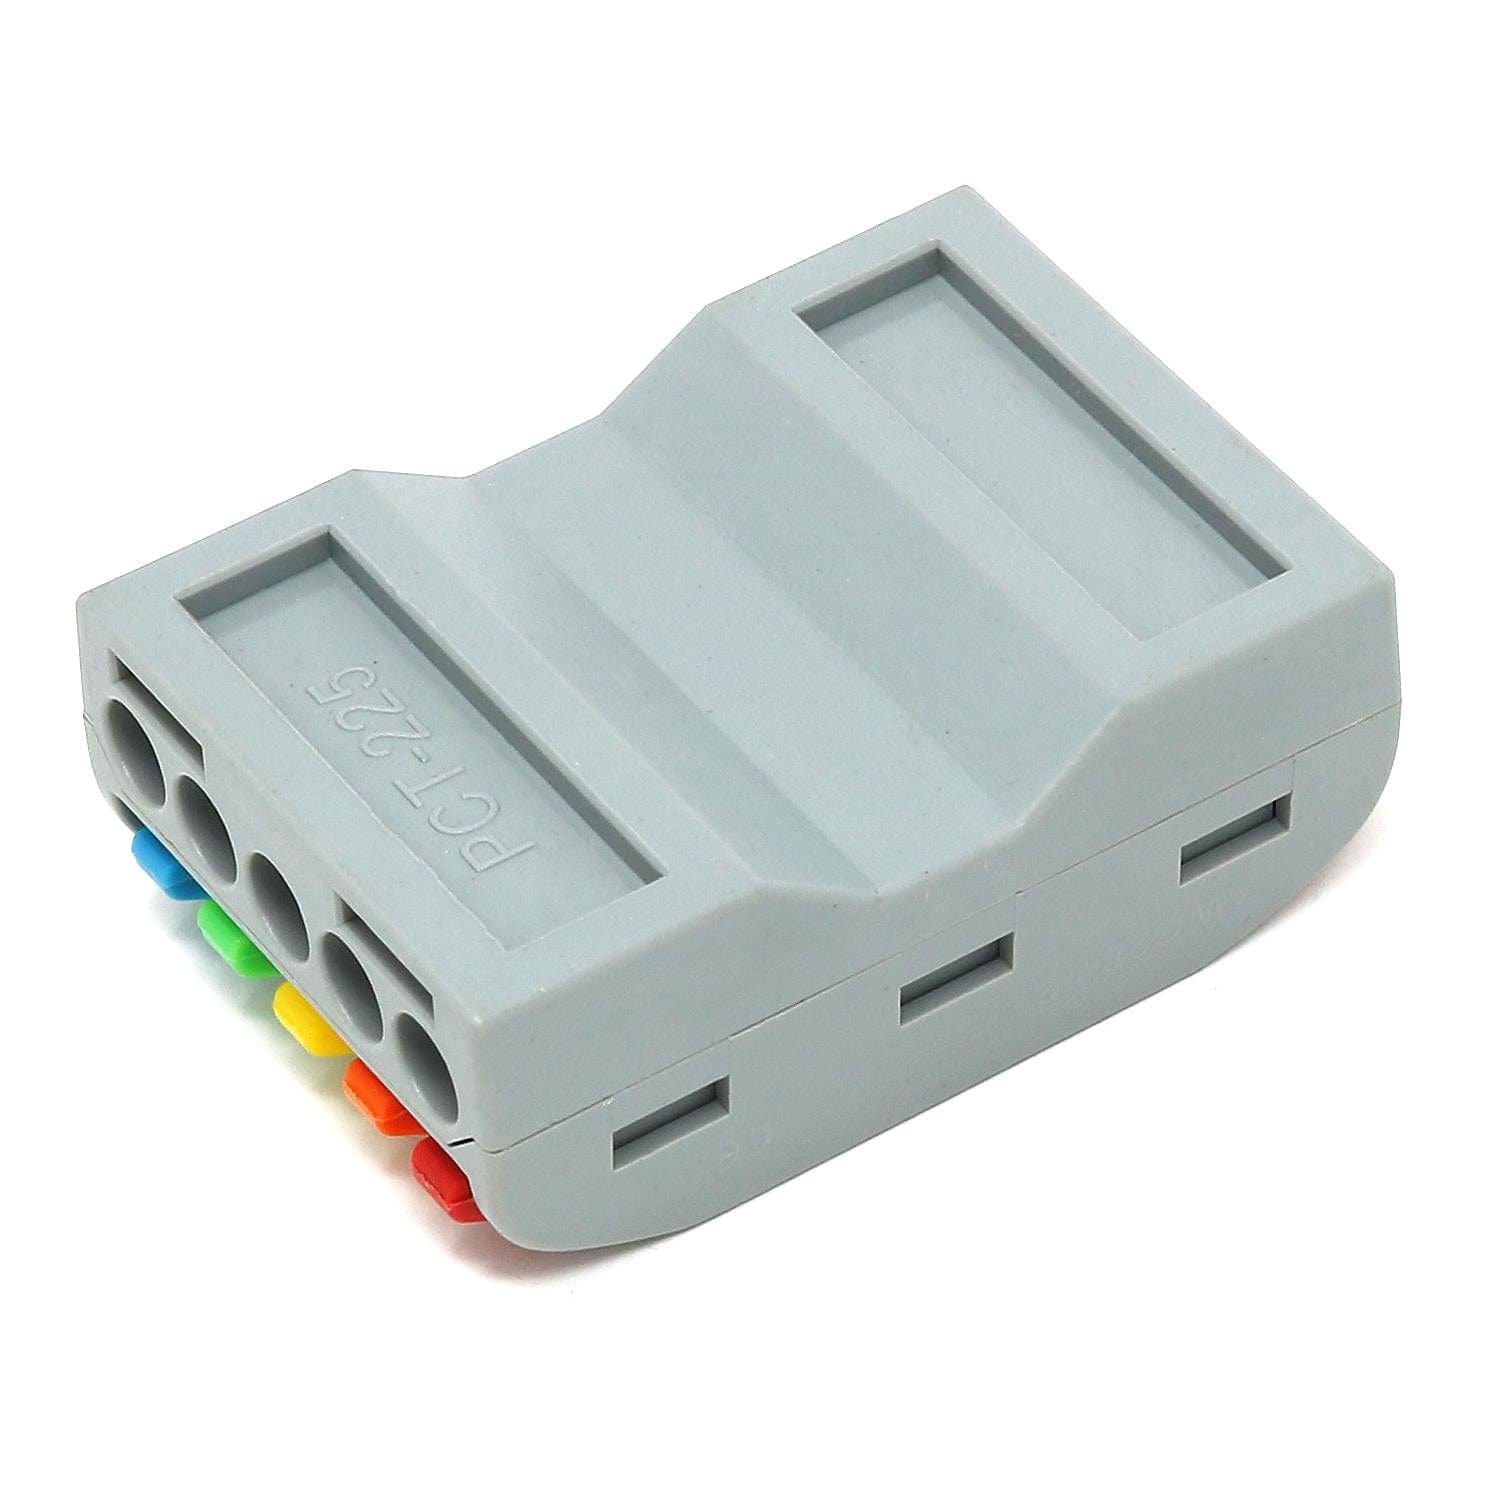 5-Way Fast Wire Connectors - Pack of 3 - The Pi Hut